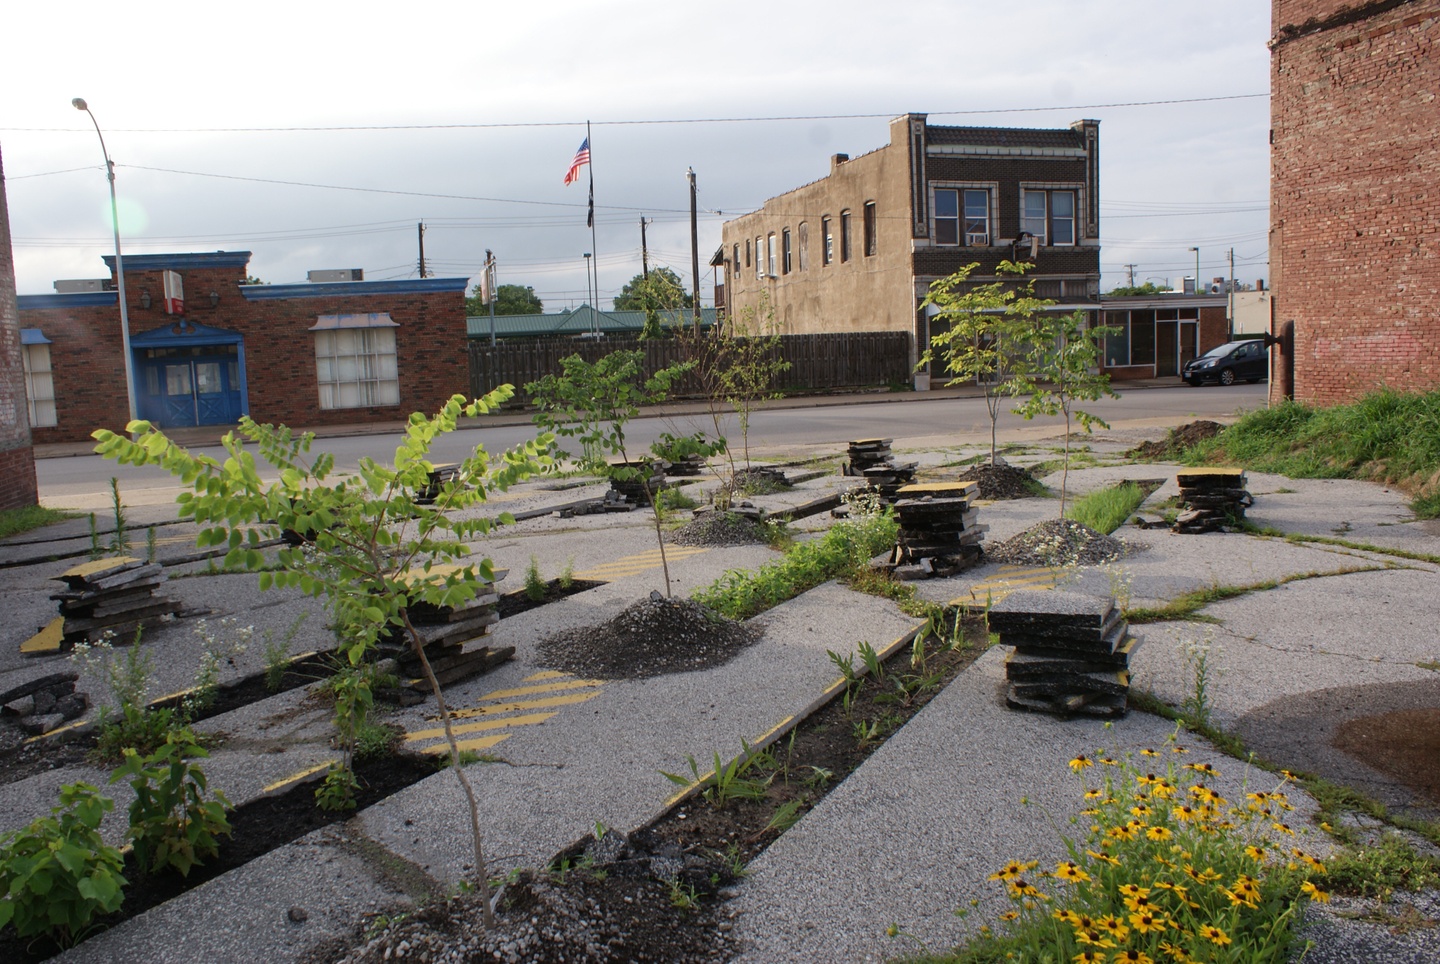 Photo of a paved lot with numerous ruptures in the paving, revealing dirt and plants, including black-eyes susans, growing in the cracks.